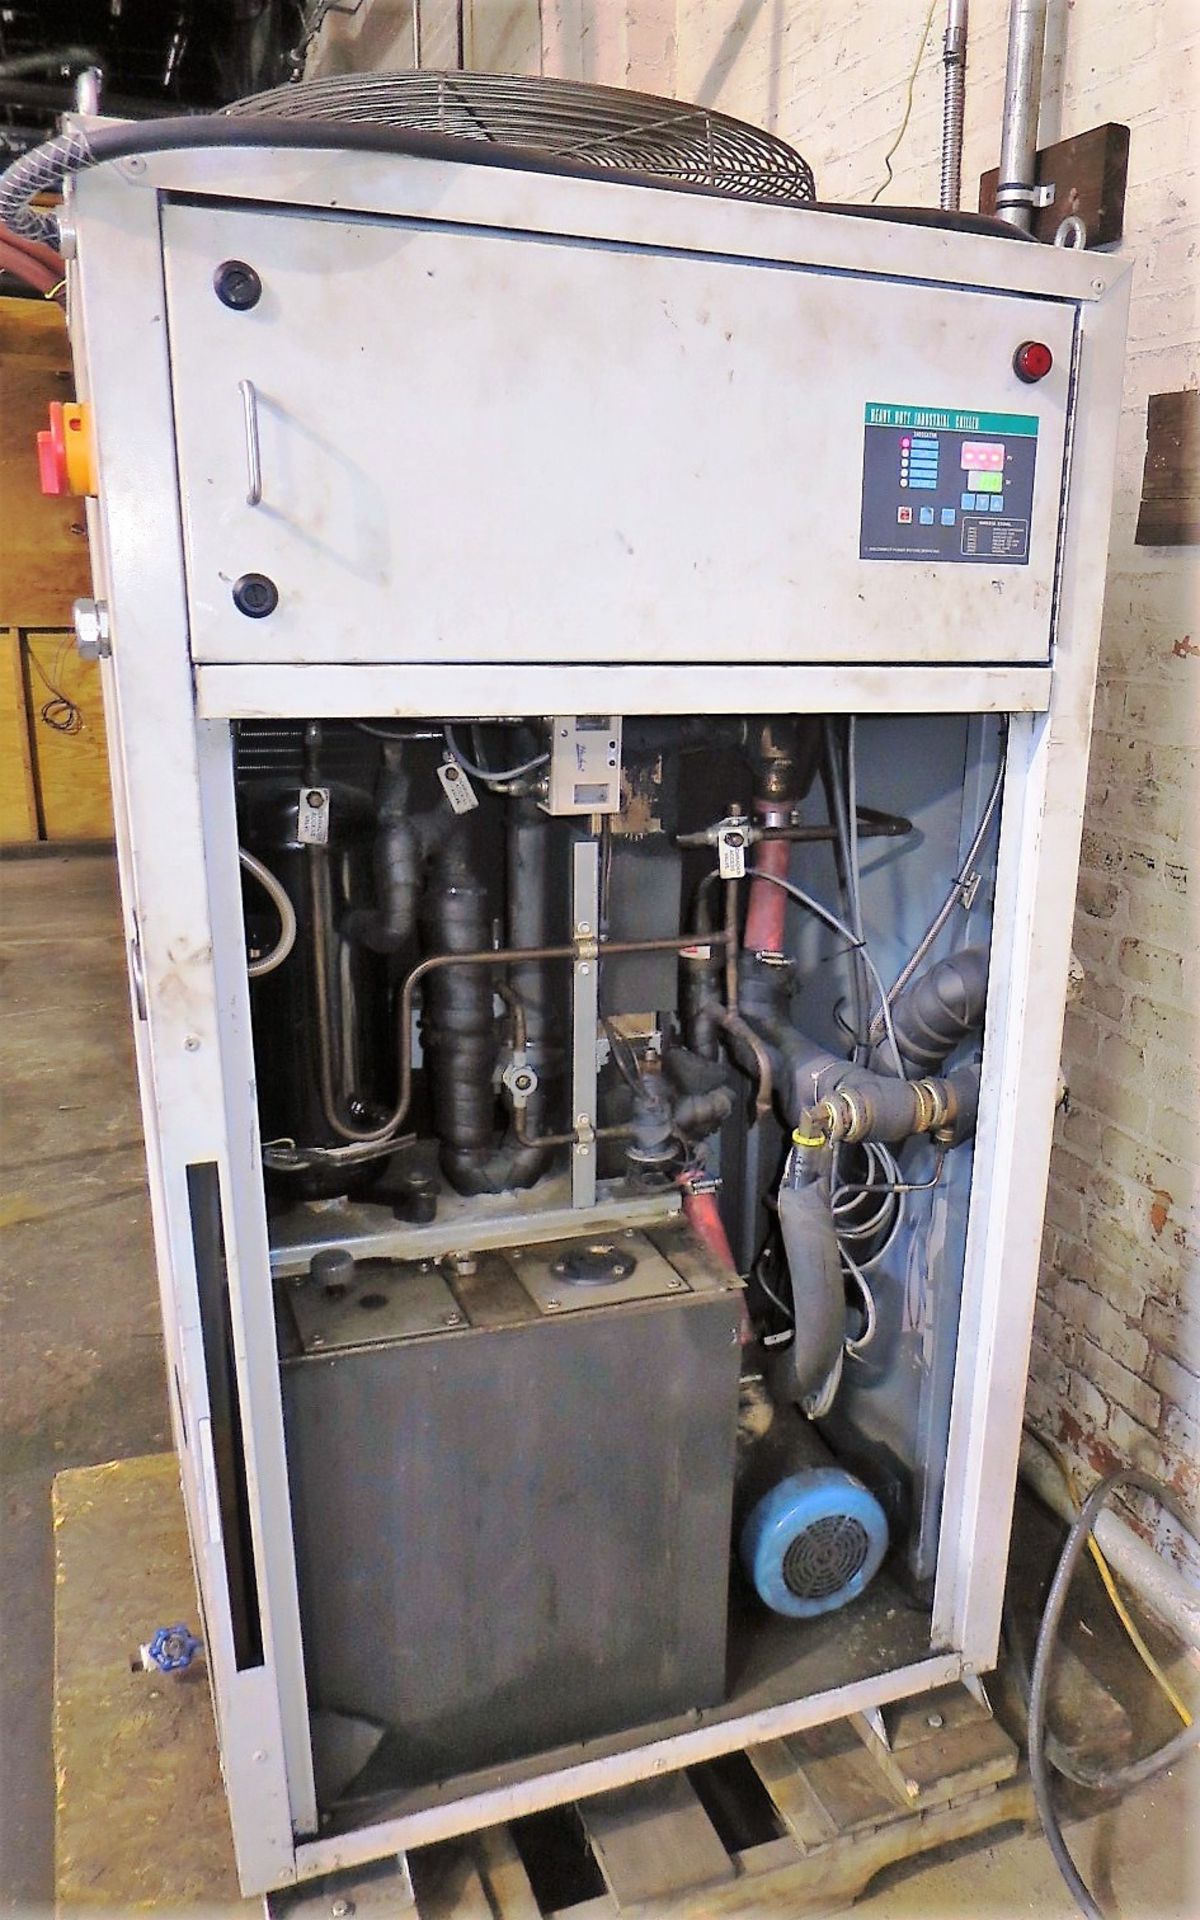 Koolant Koolers 5 Ton Air Cooled Portable Chiller, S/N 32041, New 2011 - Image 3 of 4